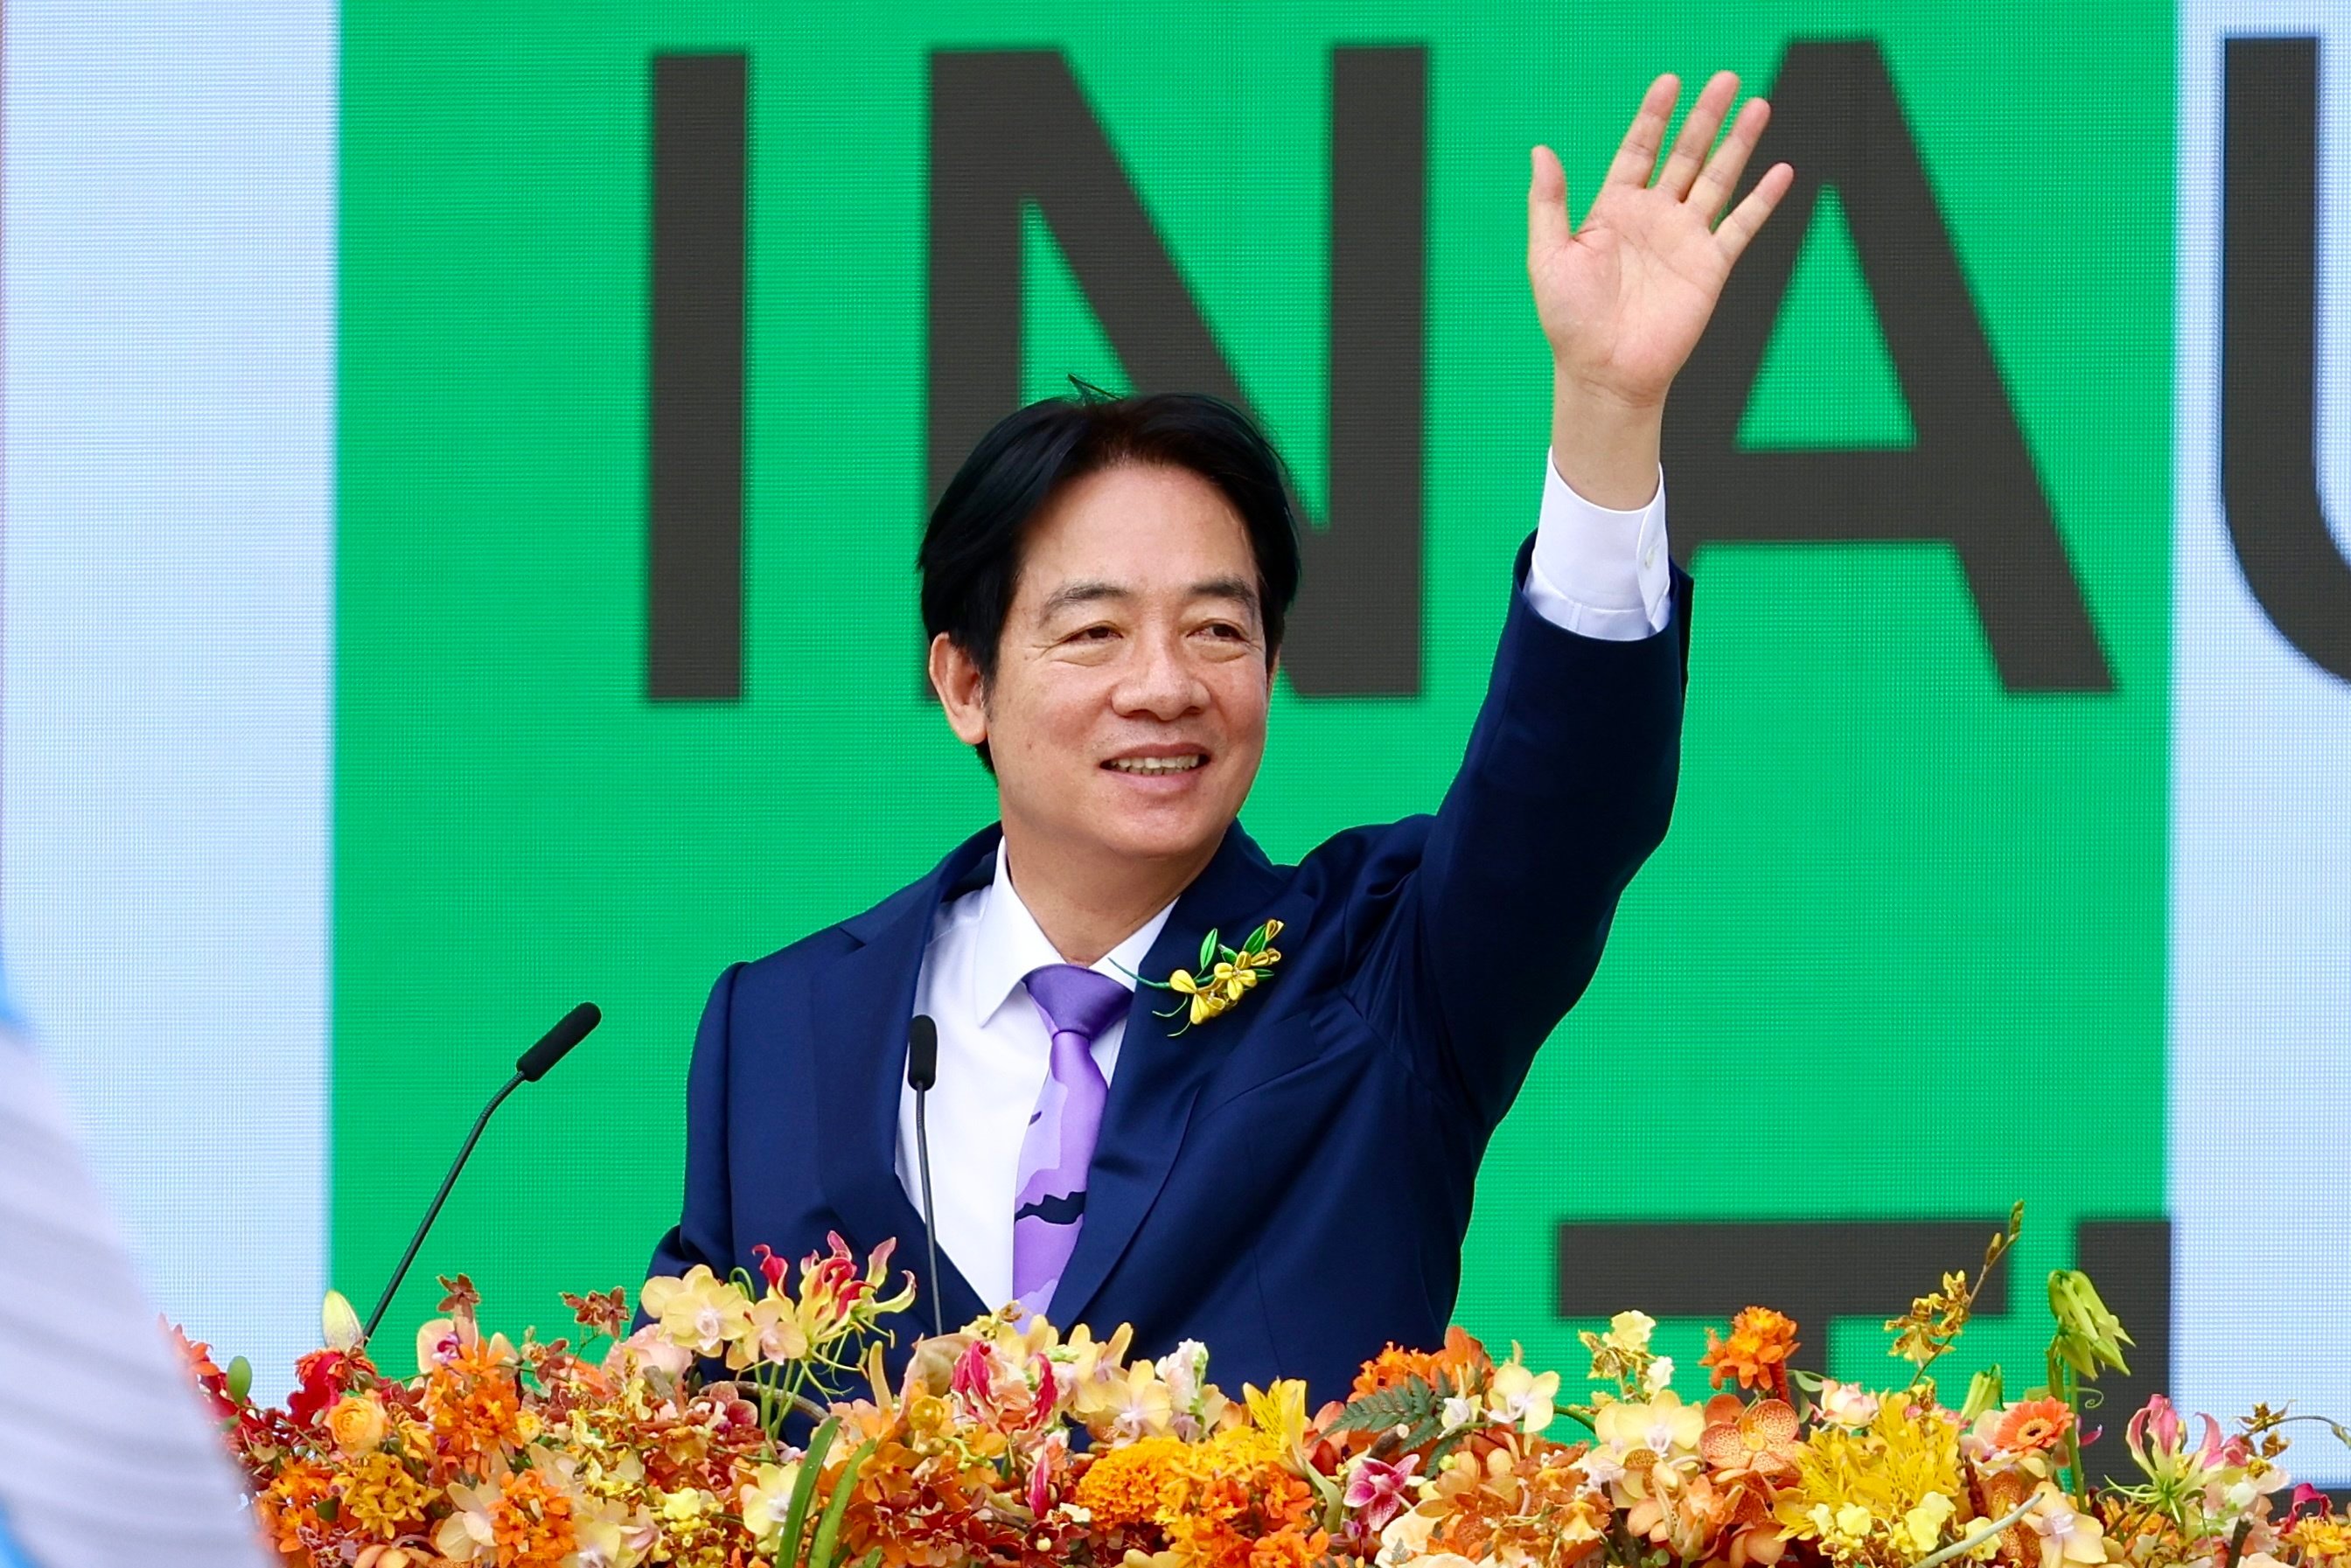 The election of William Lai as Taiwan’s president, the third consecutive presidential term for the independence-leaning Democratic Progressive Party, has increased tension between Taipei and Beijing. Photo: EPA-EFE